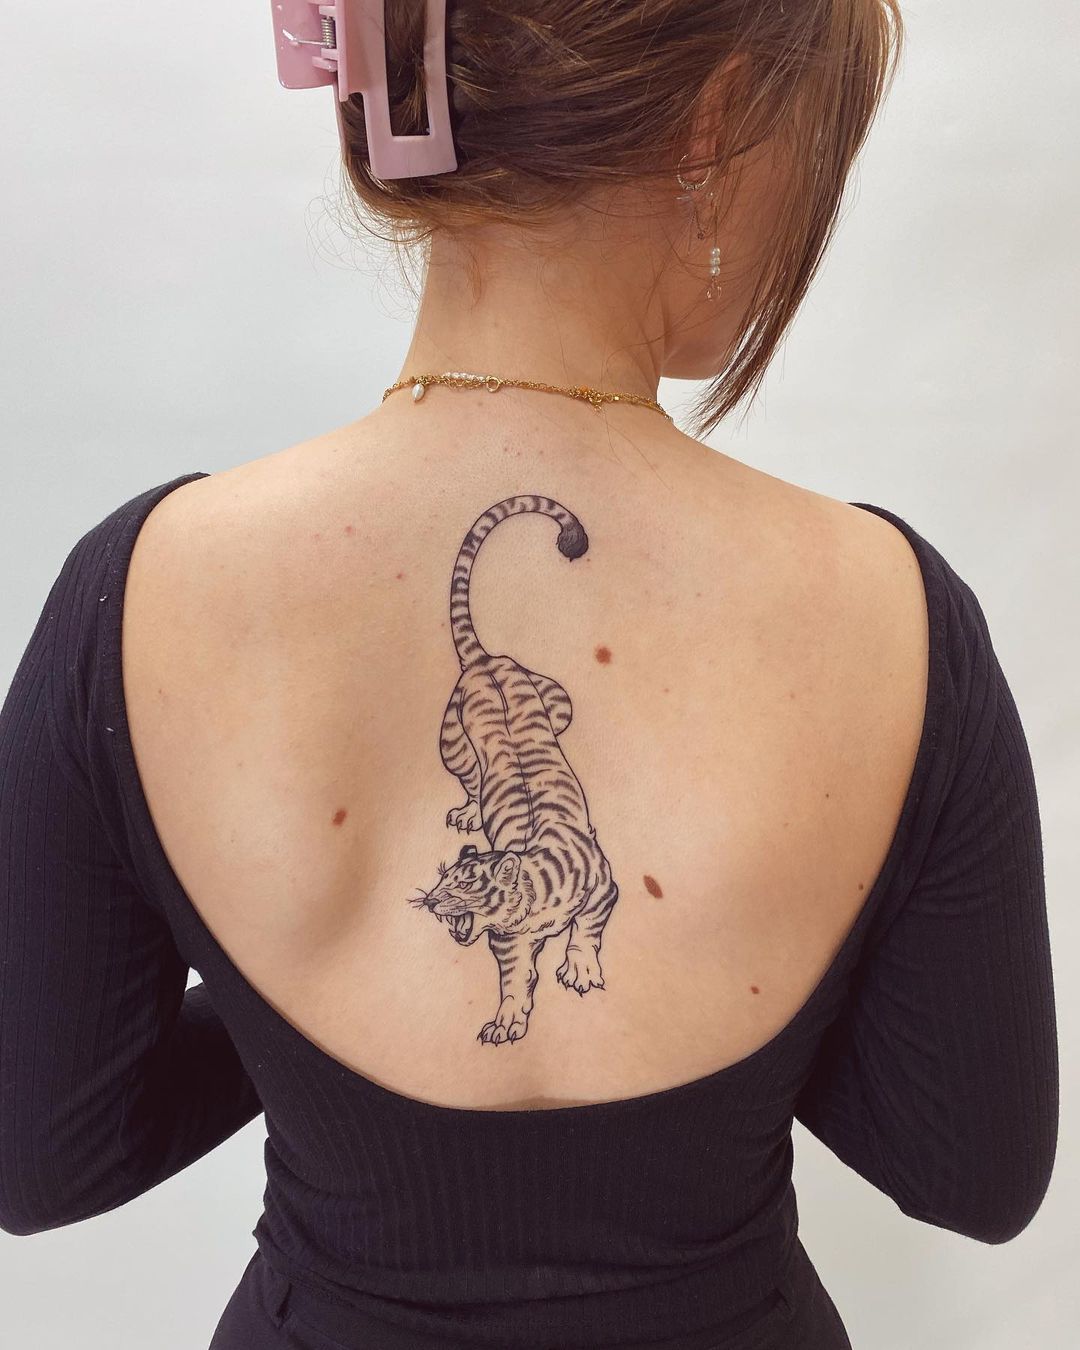 Buy Full Back Tiger Temporary Tattoo Click for More Details Online in India   Etsy